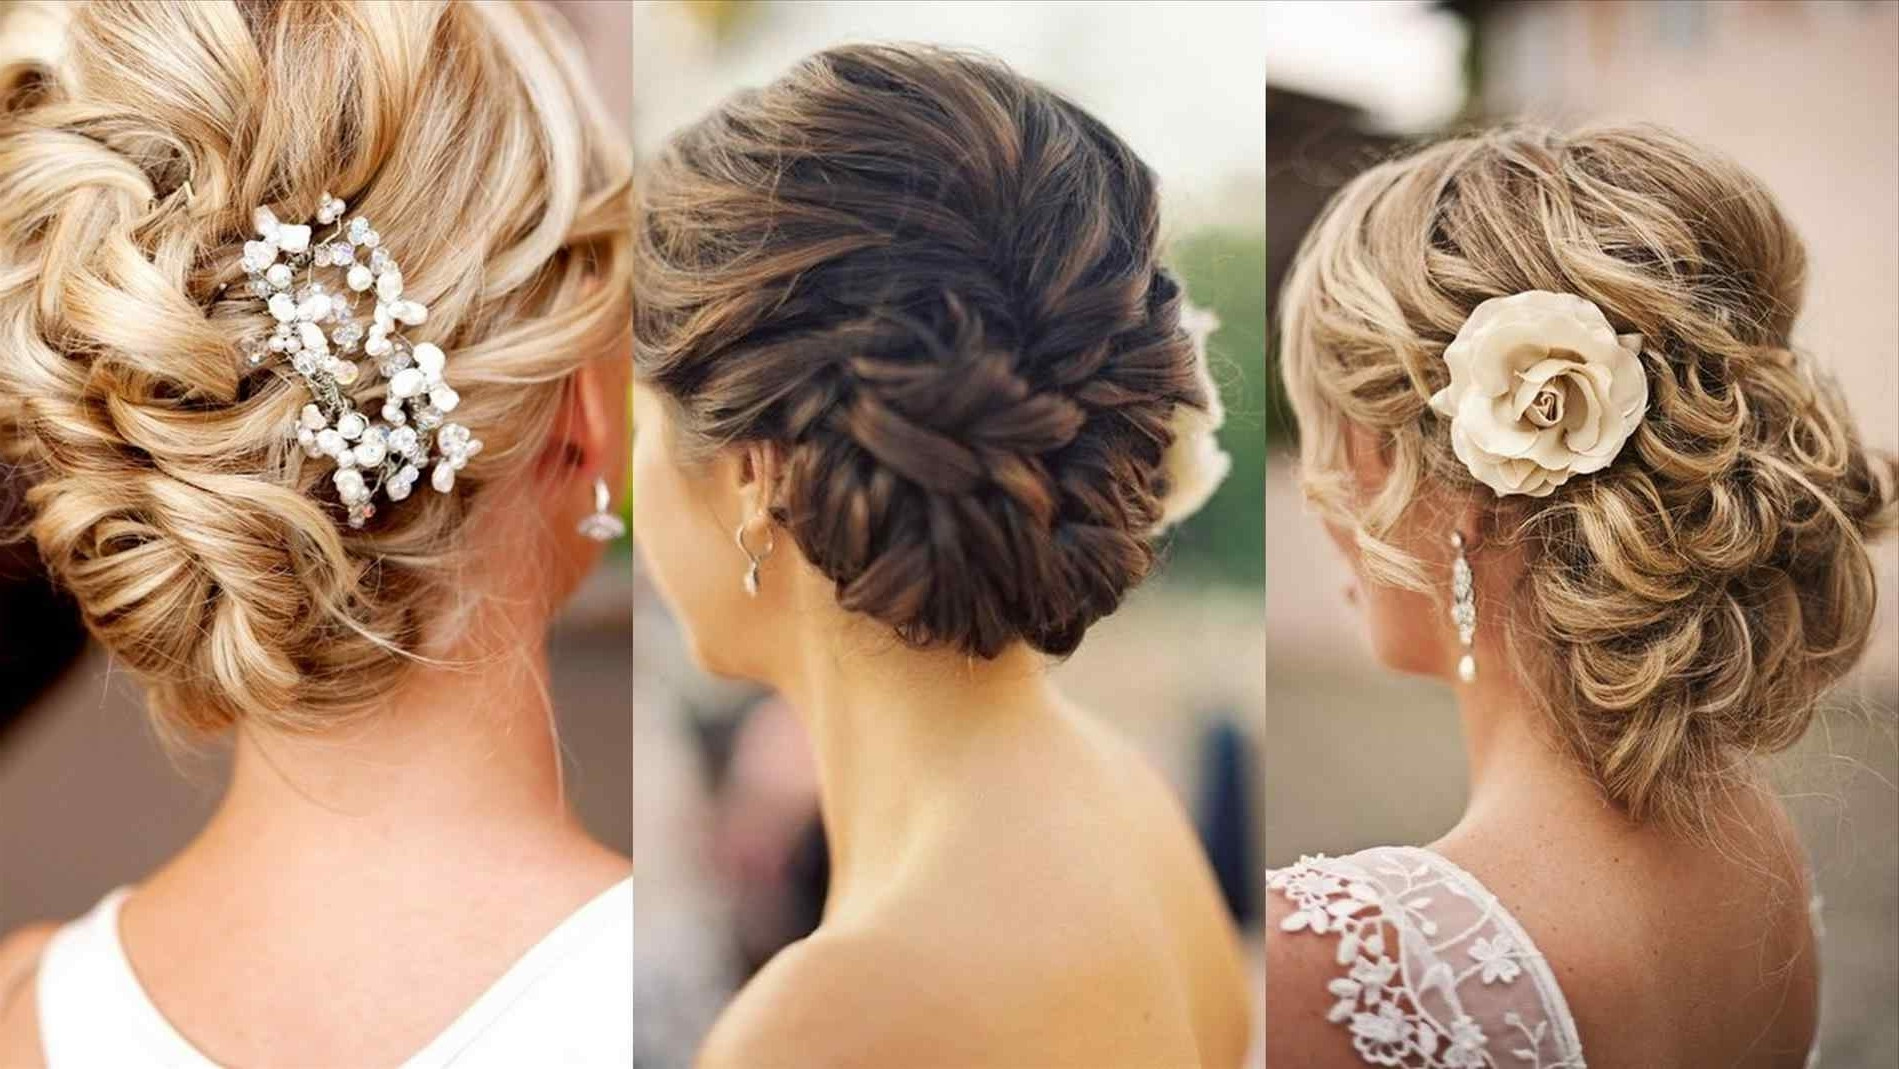 Shoulder Length Hairstyle For Wedding
 2019 Latest Wedding Updo Hairstyles For Shoulder Length Hair